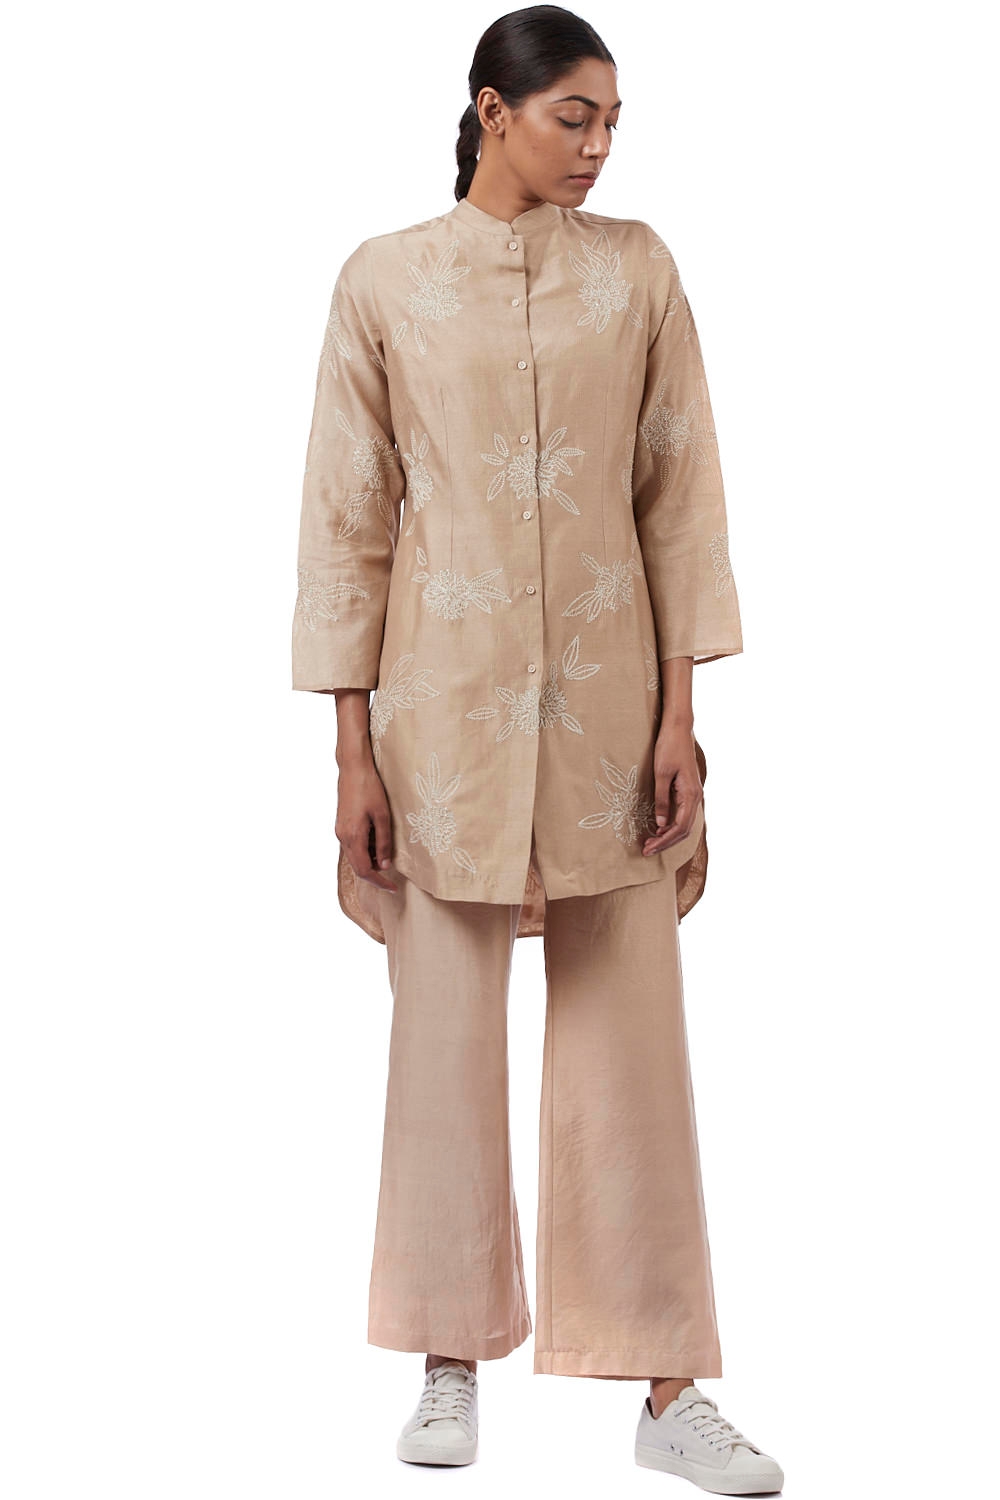 ABRAHAM AND THAKORE | Sequin Embroidered Floral Maheshwar Shirt Beige